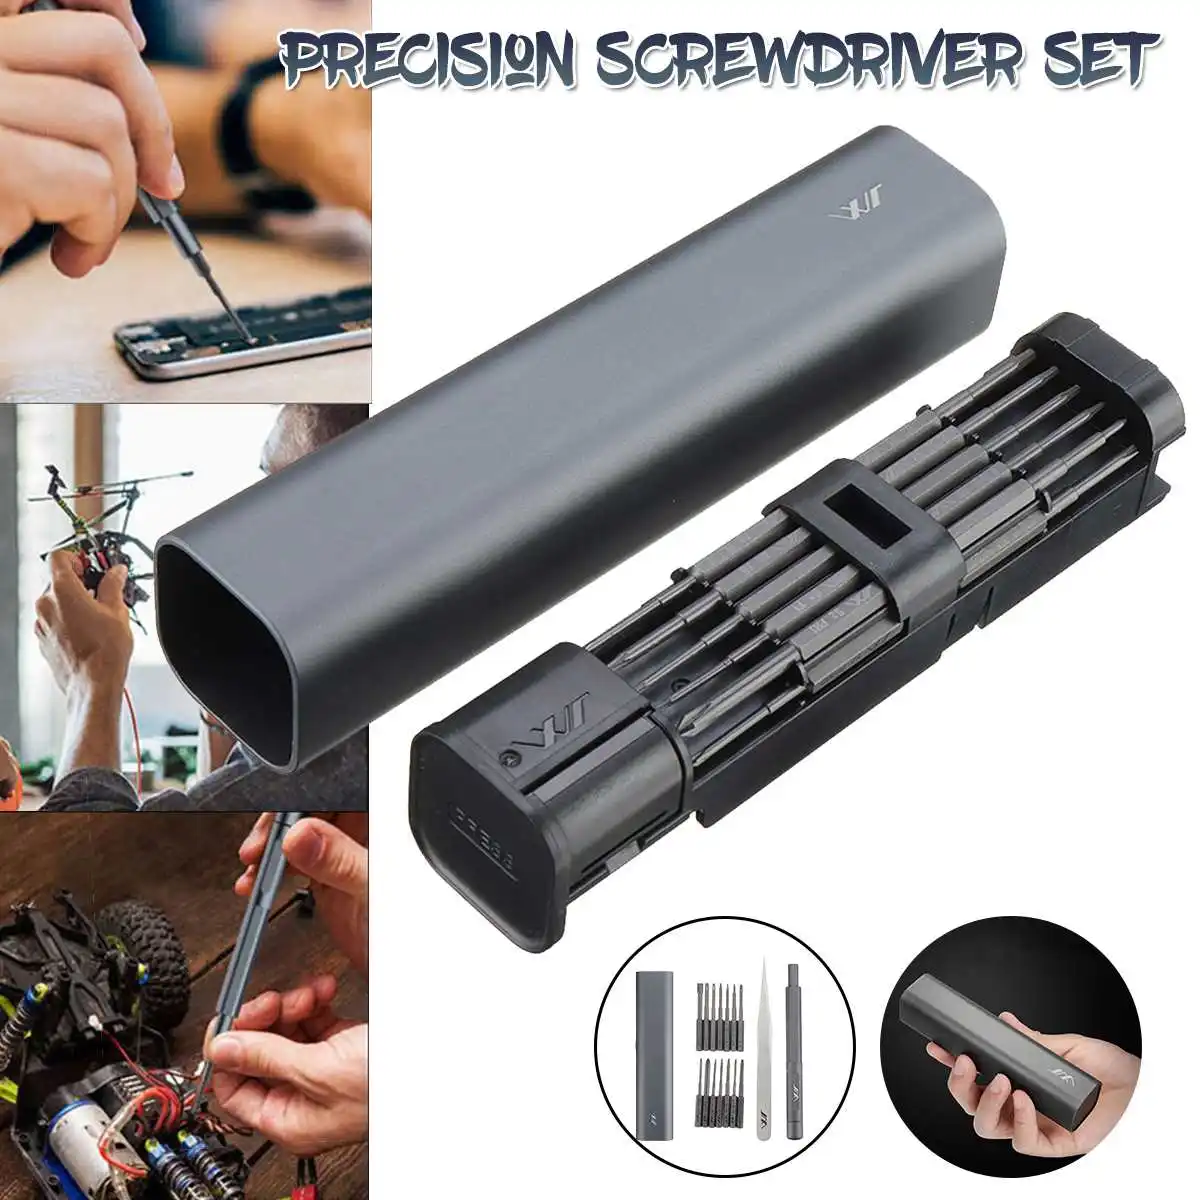 

JIMI GNT-18 18 In 1 Precision Screwdriver Set S2 Extended Screw Bits Computer Tablet Clock Electronics Repair Tools With Tweezer